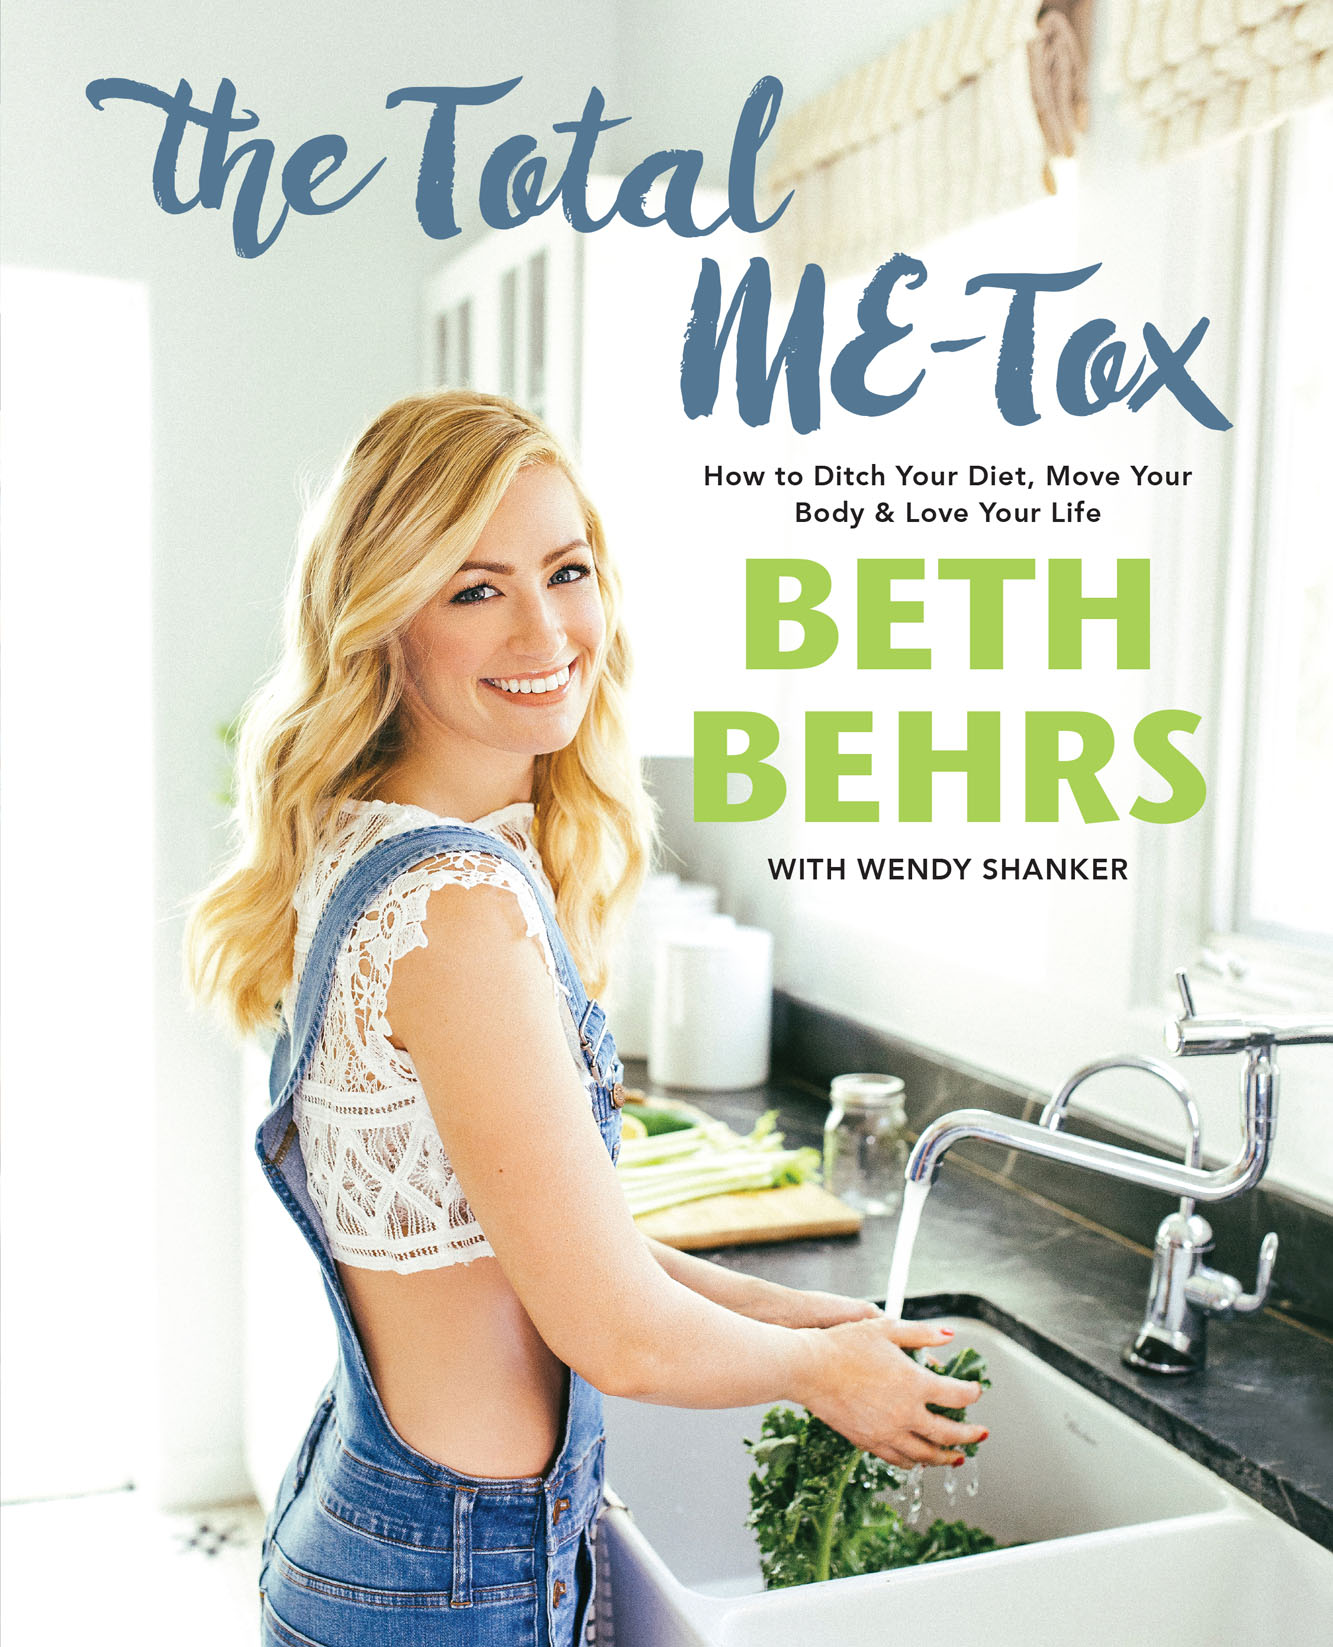 Beth Behrs wants you to be the best that you can be